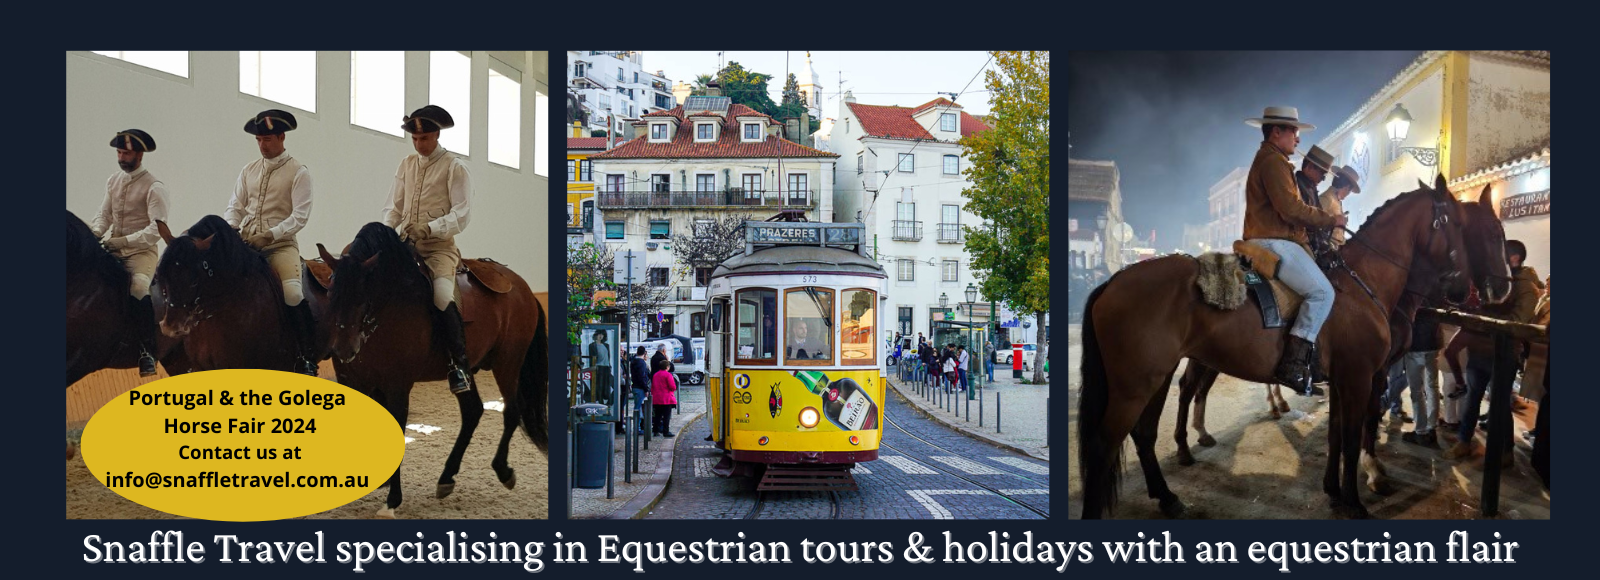 Portugal equestrian Guide - Snaffle Travel